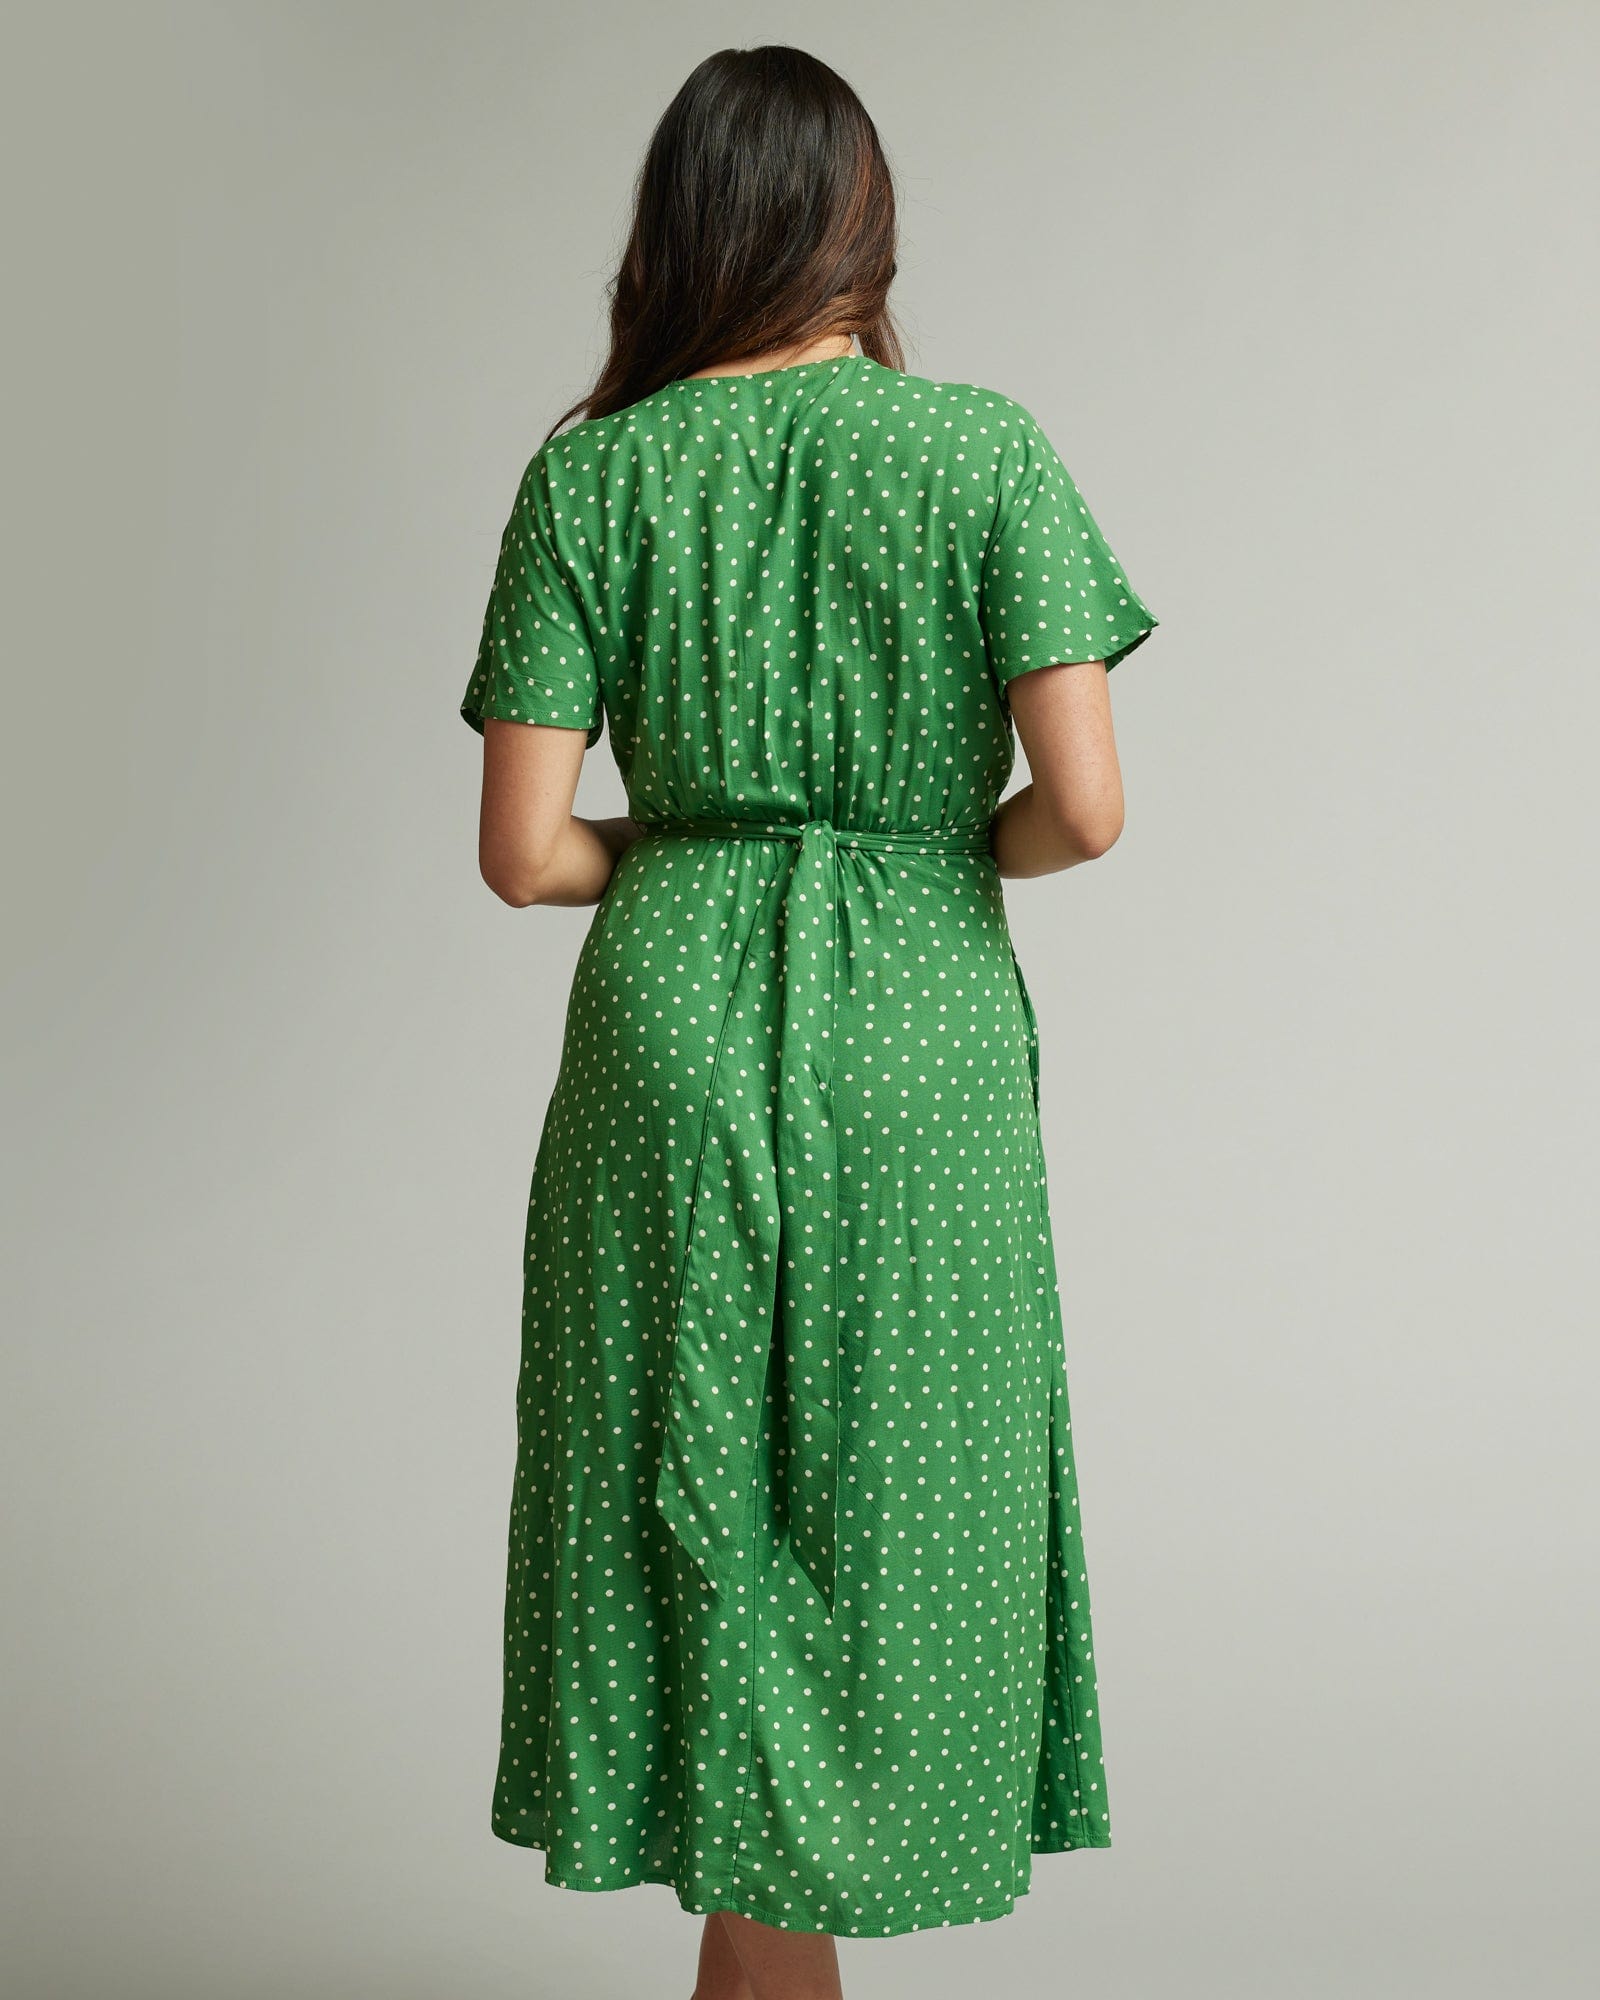 Woman in a short sleeve, midi-length, green with white polka dotted dress